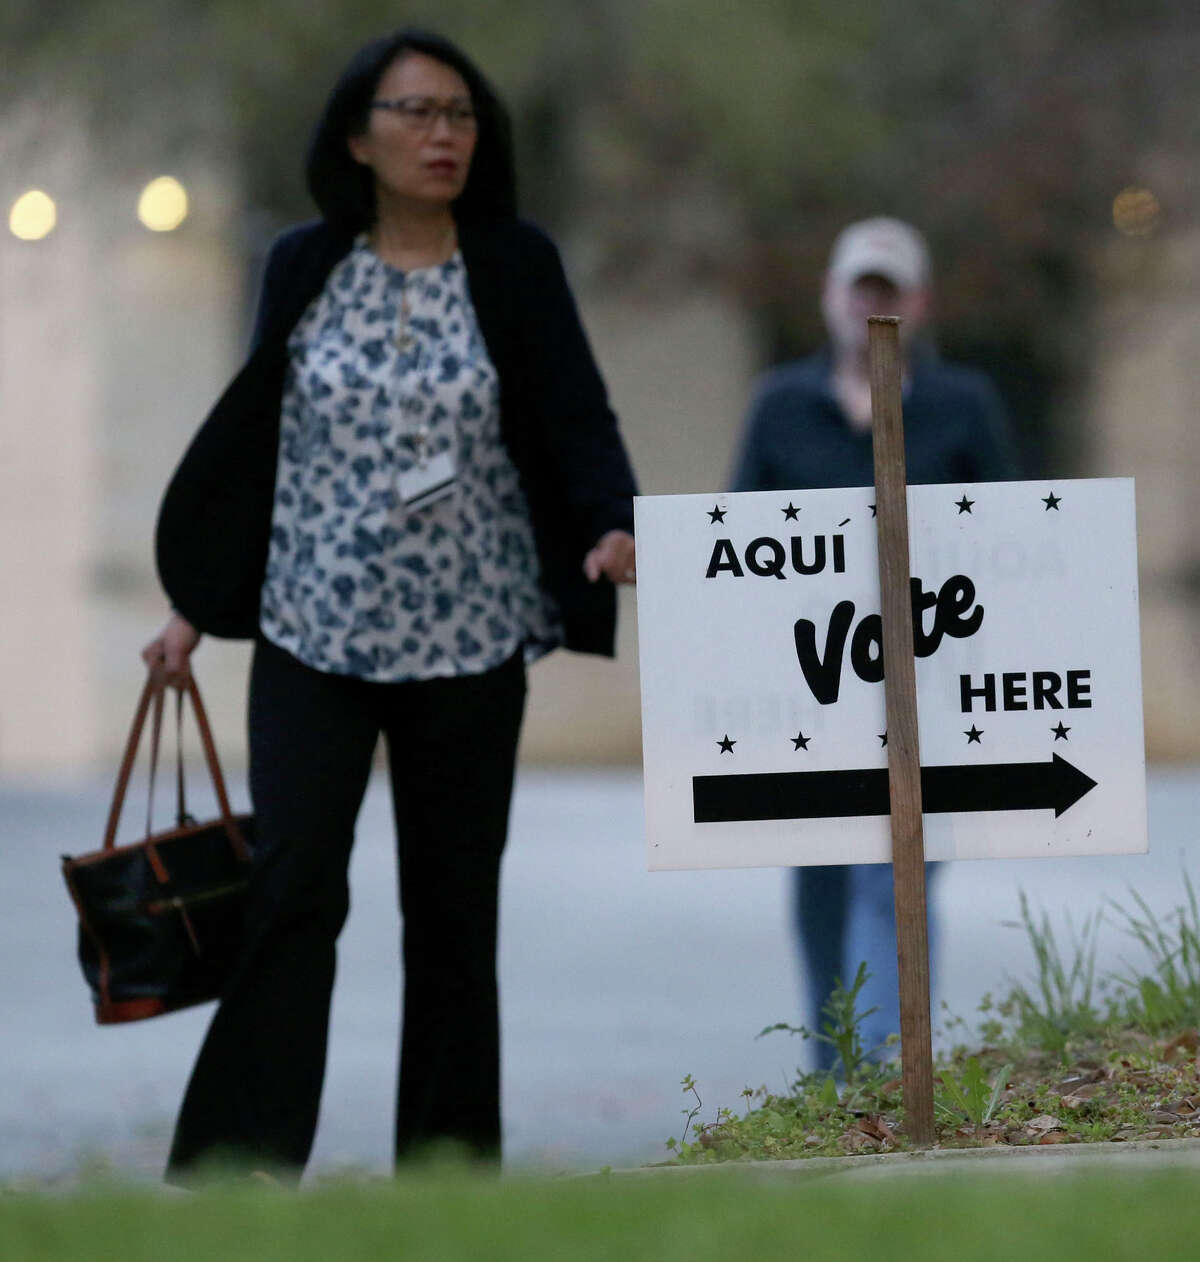 A woman with purse in hand heads to the polls at the Brook Hollow Branch of the San Antonio Public Library Tuesday March 6, 2018. Polls open today for party primaries as voters decide on a mix of races.